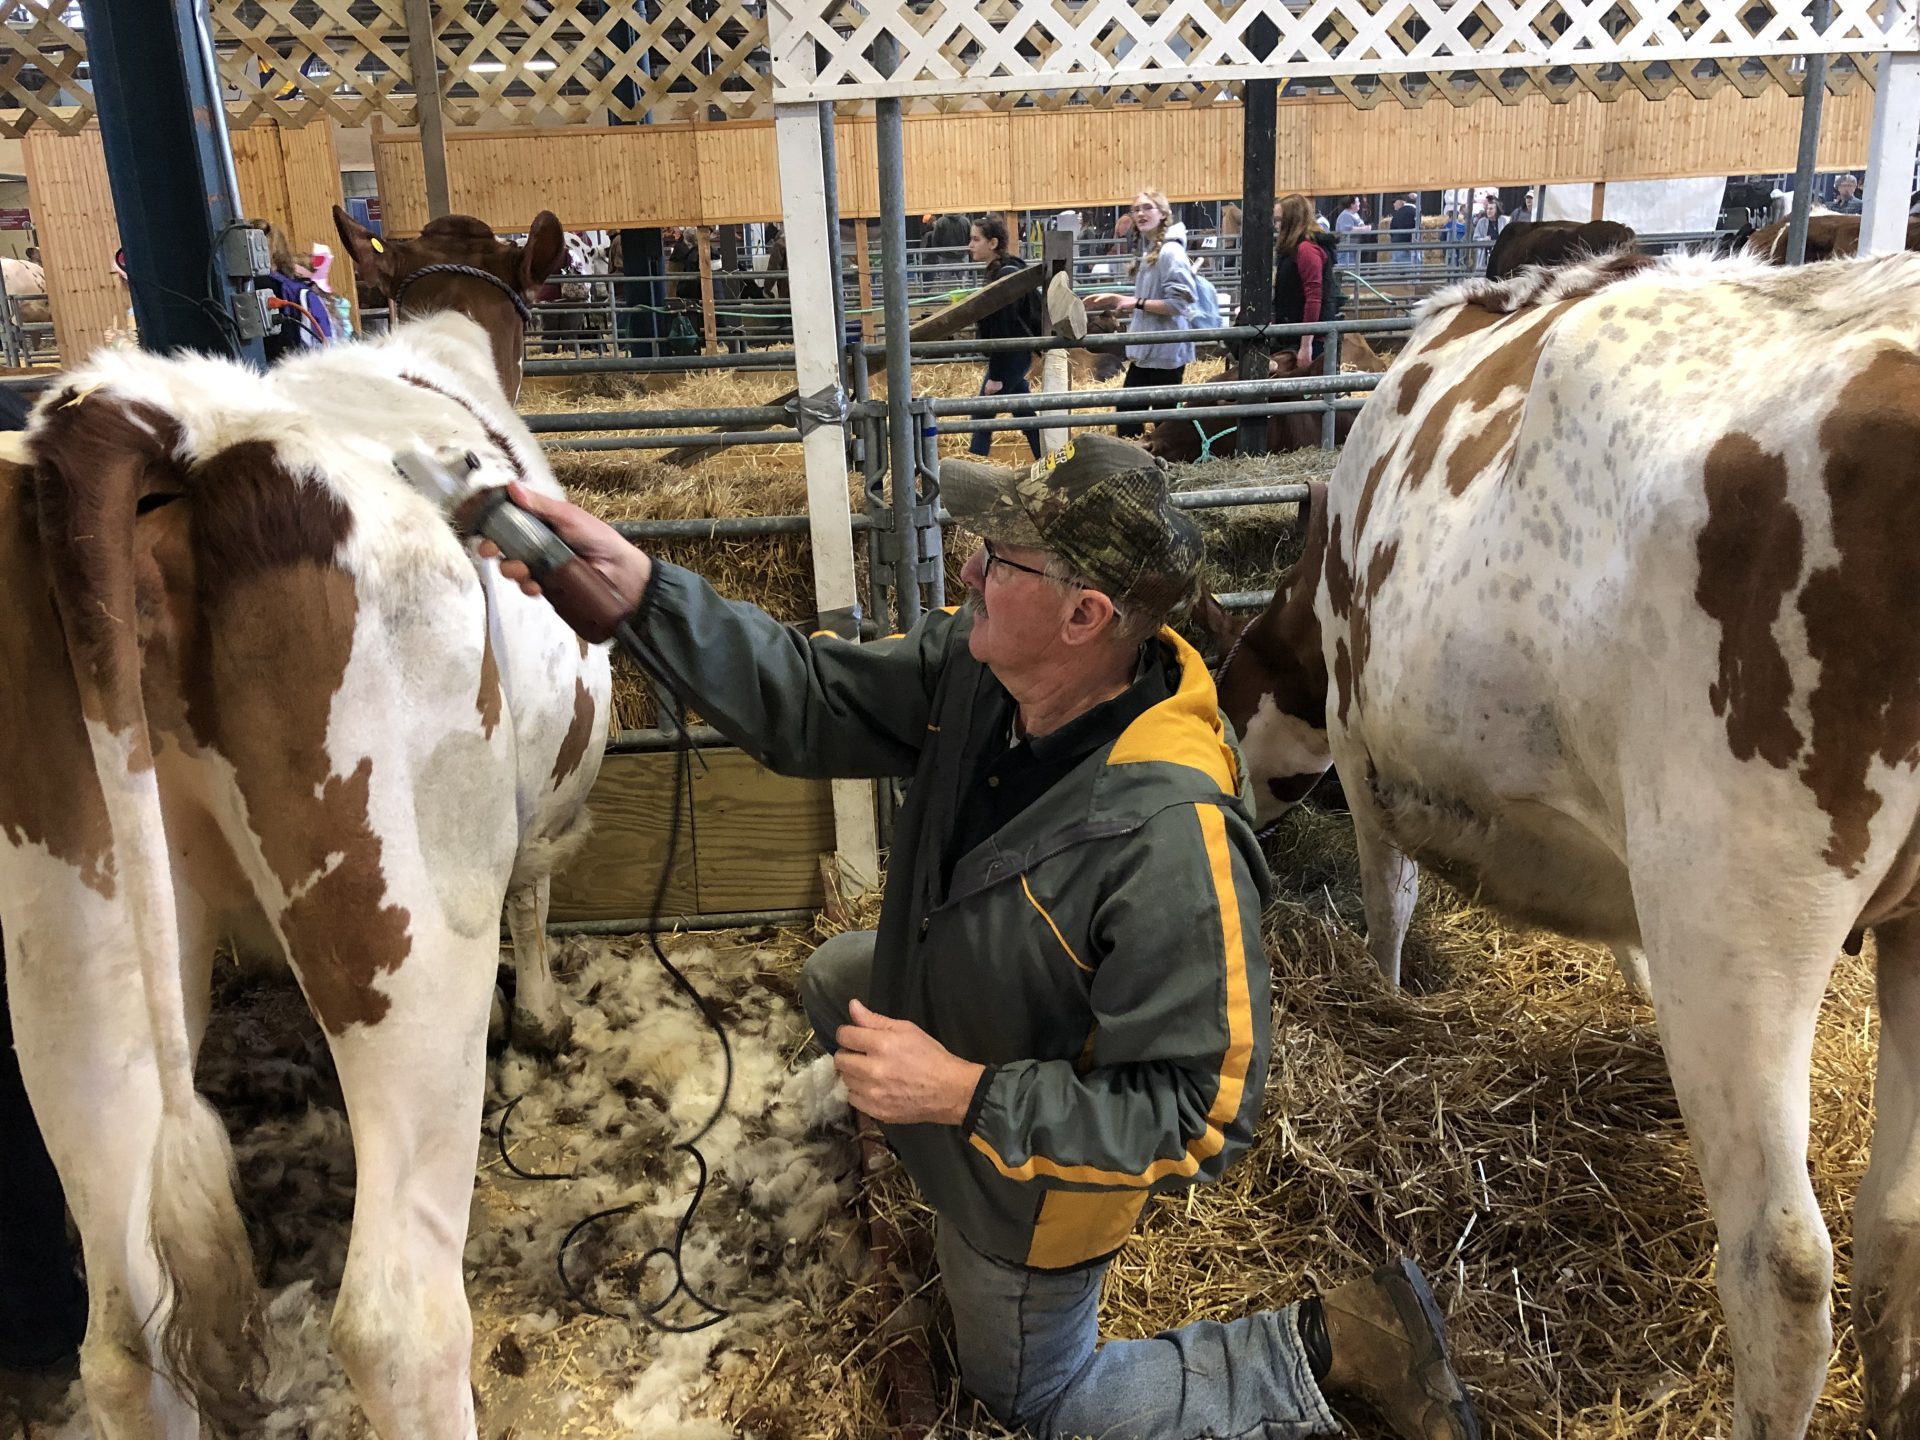 Lebanon County dairy farmer Shawn Hernley clips the hair of one of his heifers at the Pennsylvania Farm Show Complex on Jan. 8, 2019.